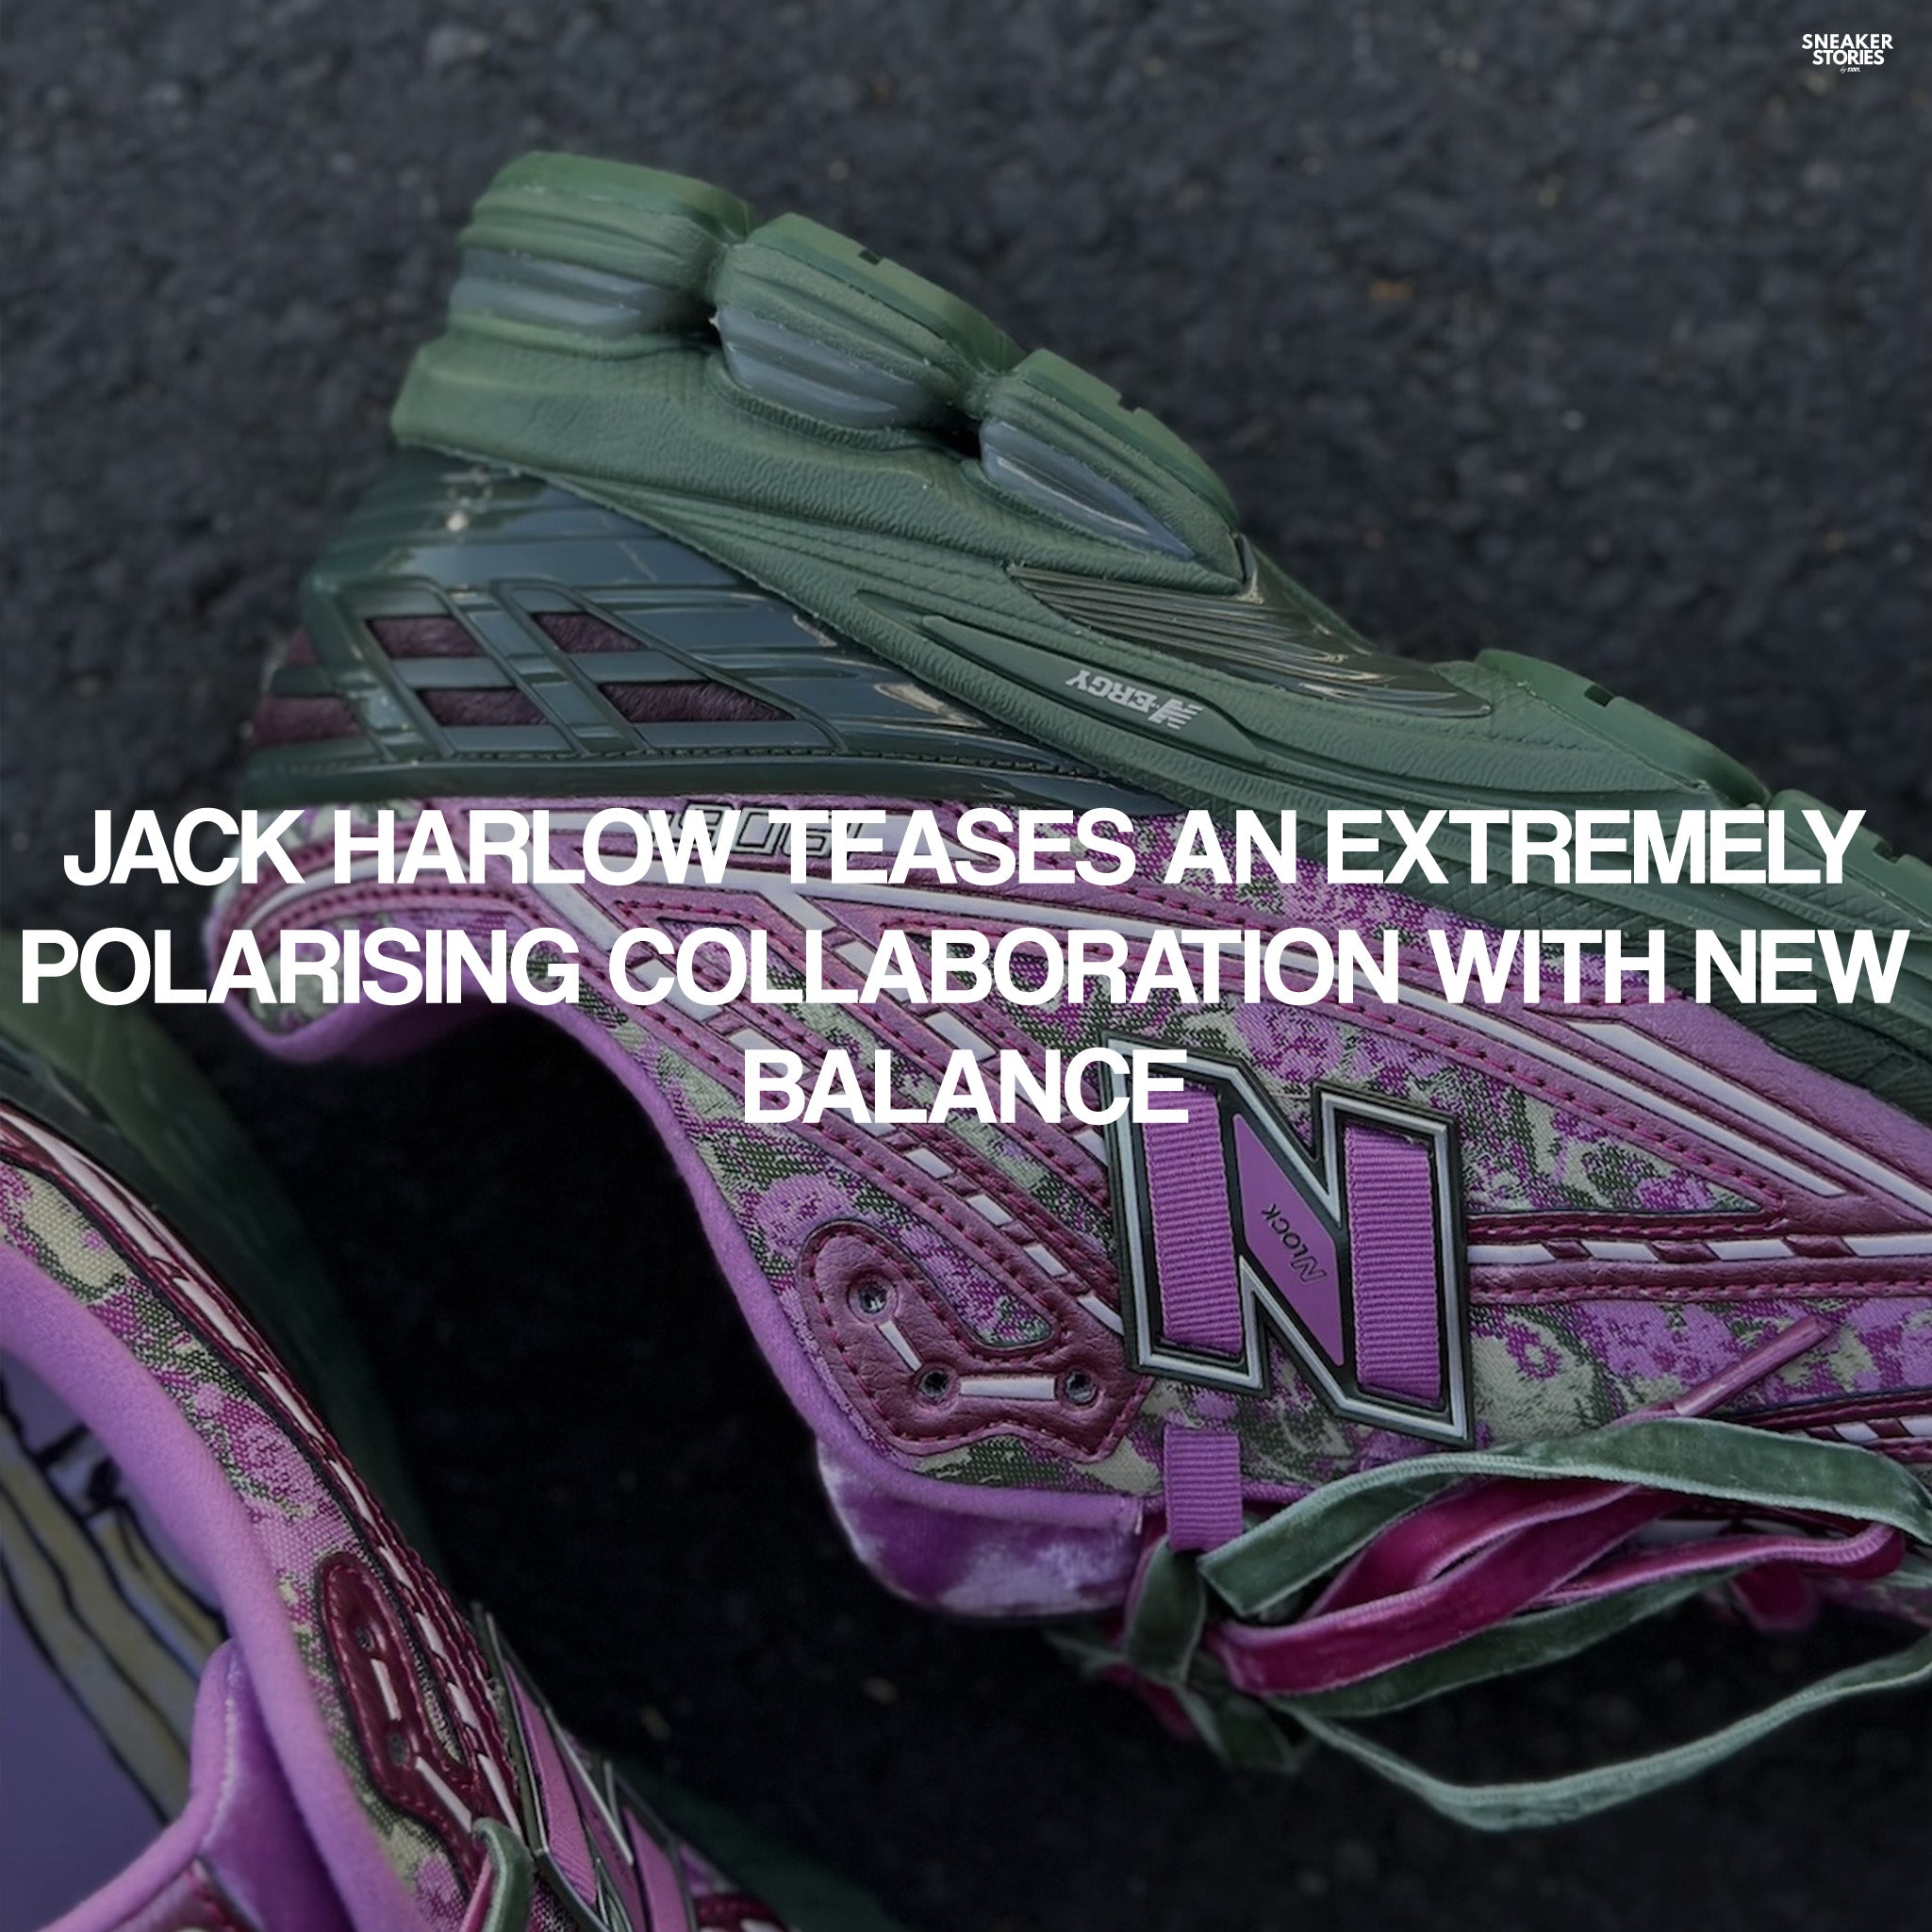 Jack harlow teases an extremely polarising collaboration with New Balance